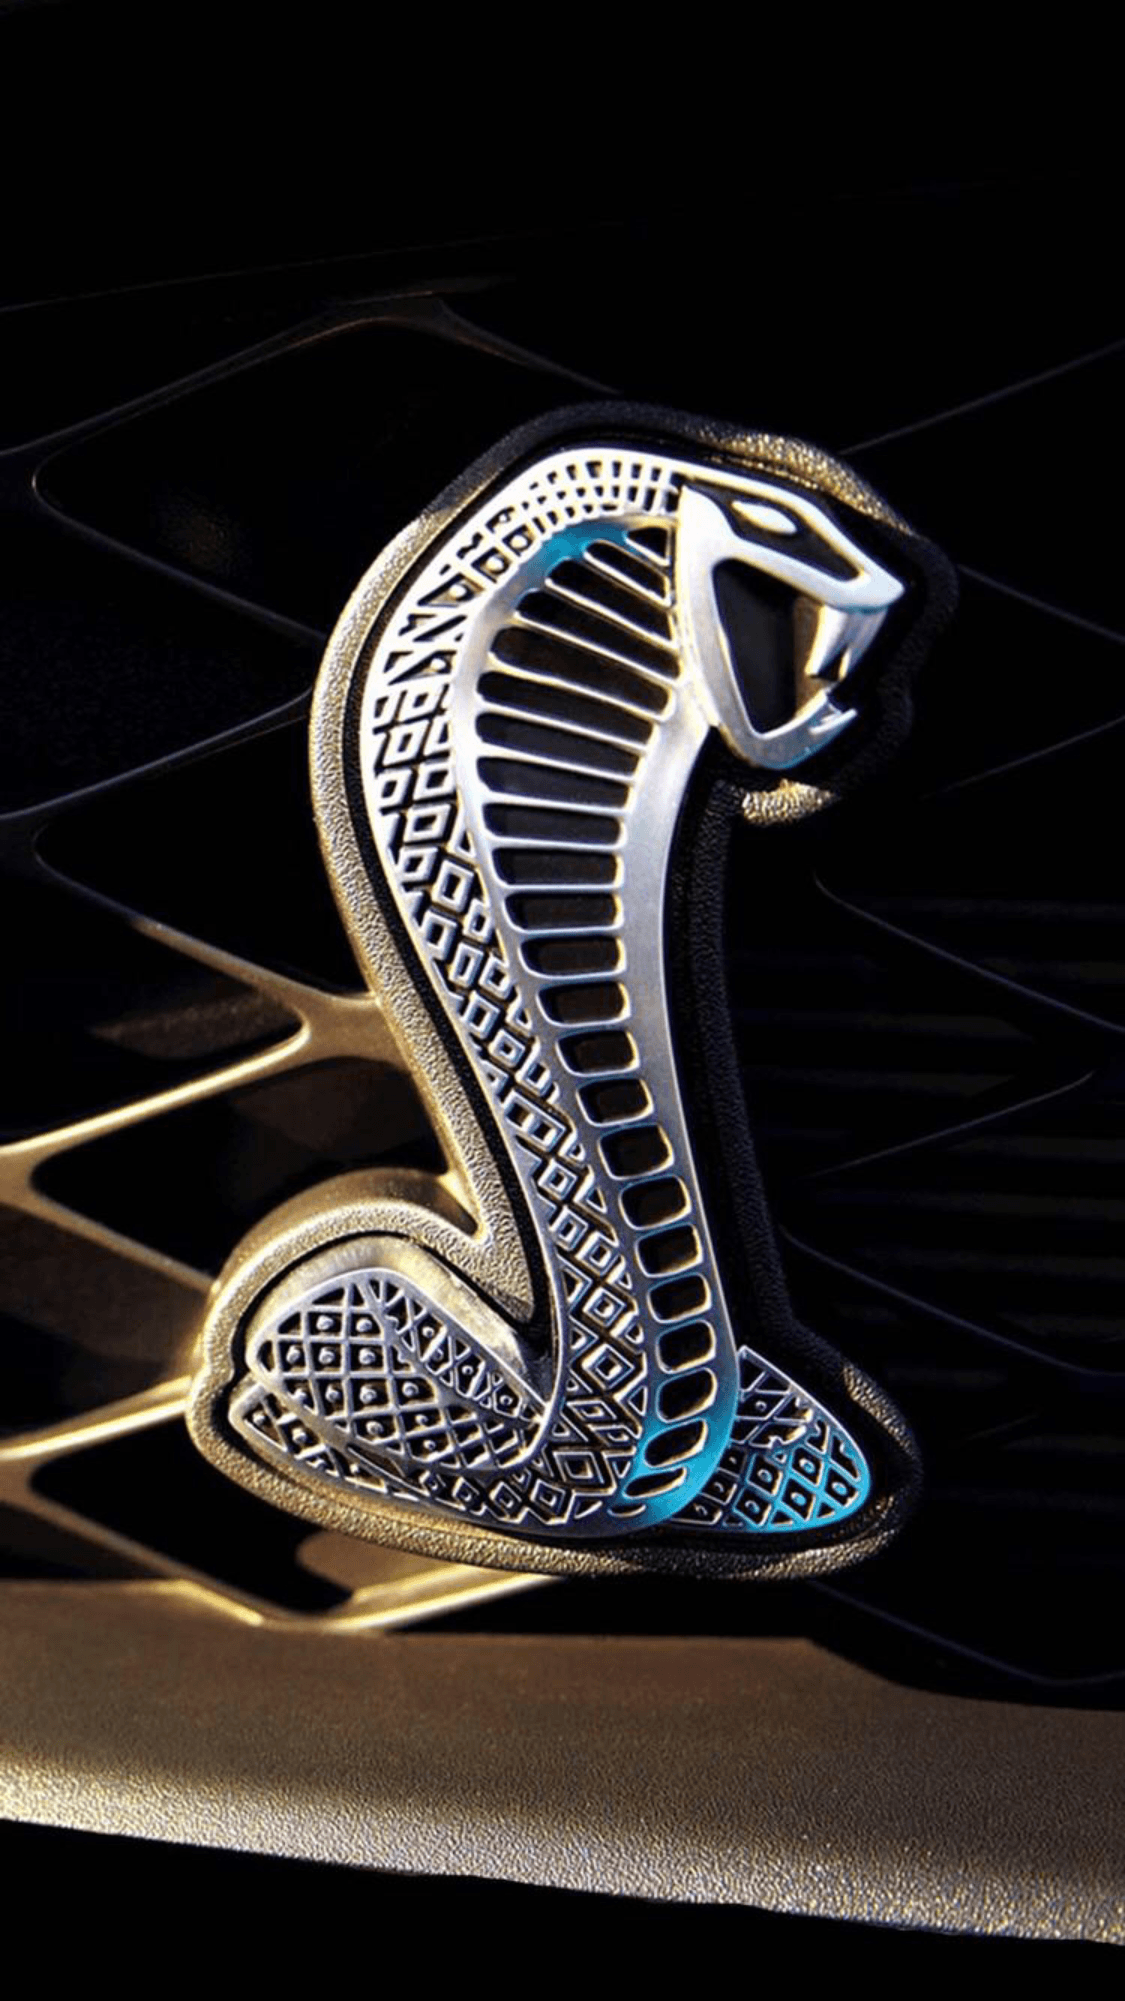 Red Shelby Logo - Pin by Douglas Bruce on Mustang | Pinterest | Mustang, Shelby GT500 ...